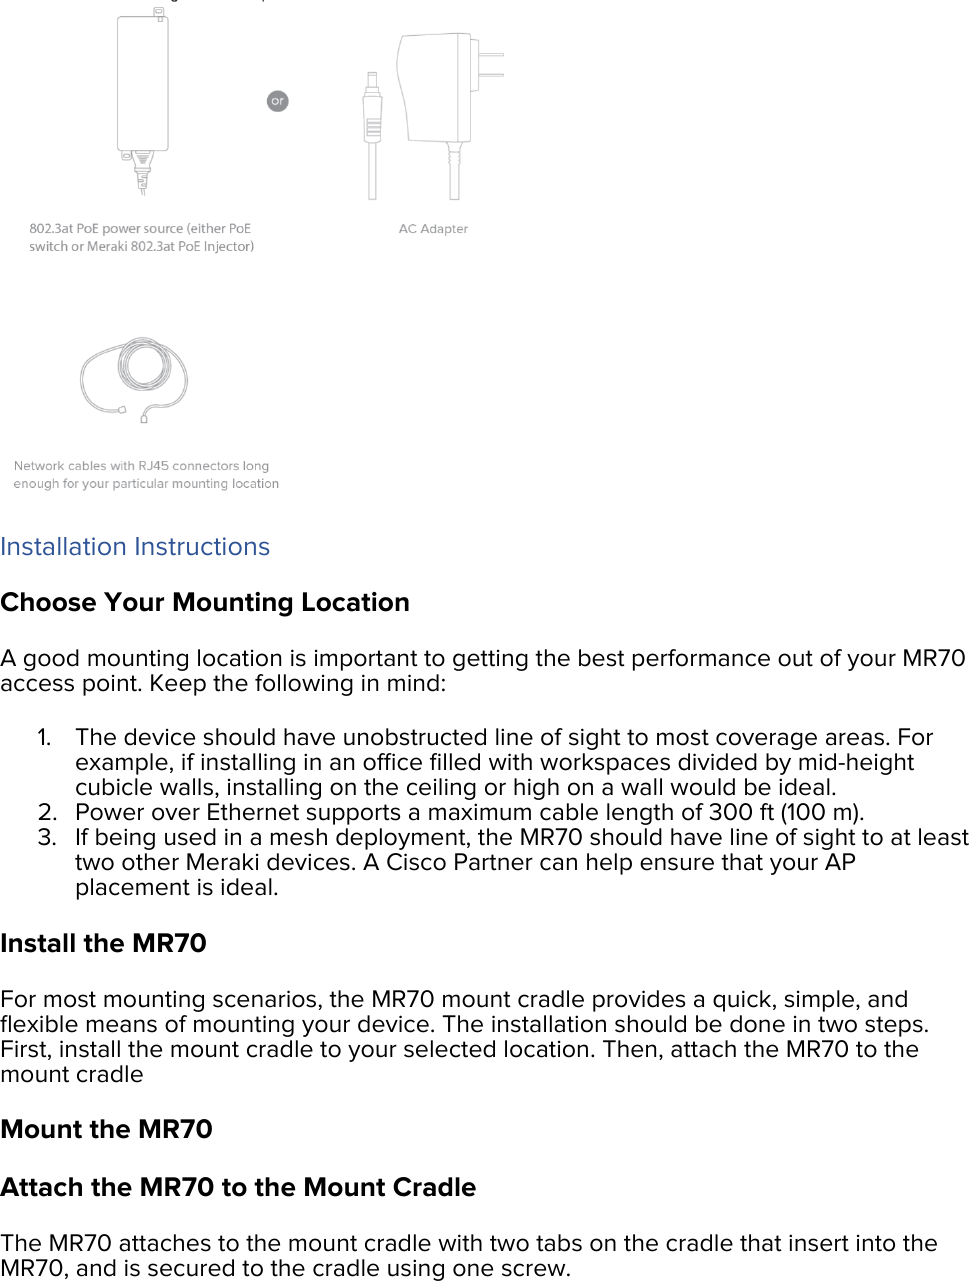  Installation Instructions Choose Your Mounting Location A good mounting location is important to getting the best performance out of your MR70 access point. Keep the following in mind: 1. The device should have unobstructed line of sight to most coverage areas. For example, if installing in an ofﬁce ﬁlled with workspaces divided by mid-height cubicle walls, installing on the ceiling or high on a wall would be ideal. 2. Power over Ethernet supports a maximum cable length of 300 ft (100 m). 3. If being used in a mesh deployment, the MR70 should have line of sight to at least two other Meraki devices. A Cisco Partner can help ensure that your AP placement is ideal. Install the MR70 For most mounting scenarios, the MR70 mount cradle provides a quick, simple, and ﬂexible means of mounting your device. The installation should be done in two steps. First, install the mount cradle to your selected location. Then, attach the MR70 to the mount cradle Mount the MR70 Attach the MR70 to the Mount Cradle The MR70 attaches to the mount cradle with two tabs on the cradle that insert into the MR70, and is secured to the cradle using one screw. 